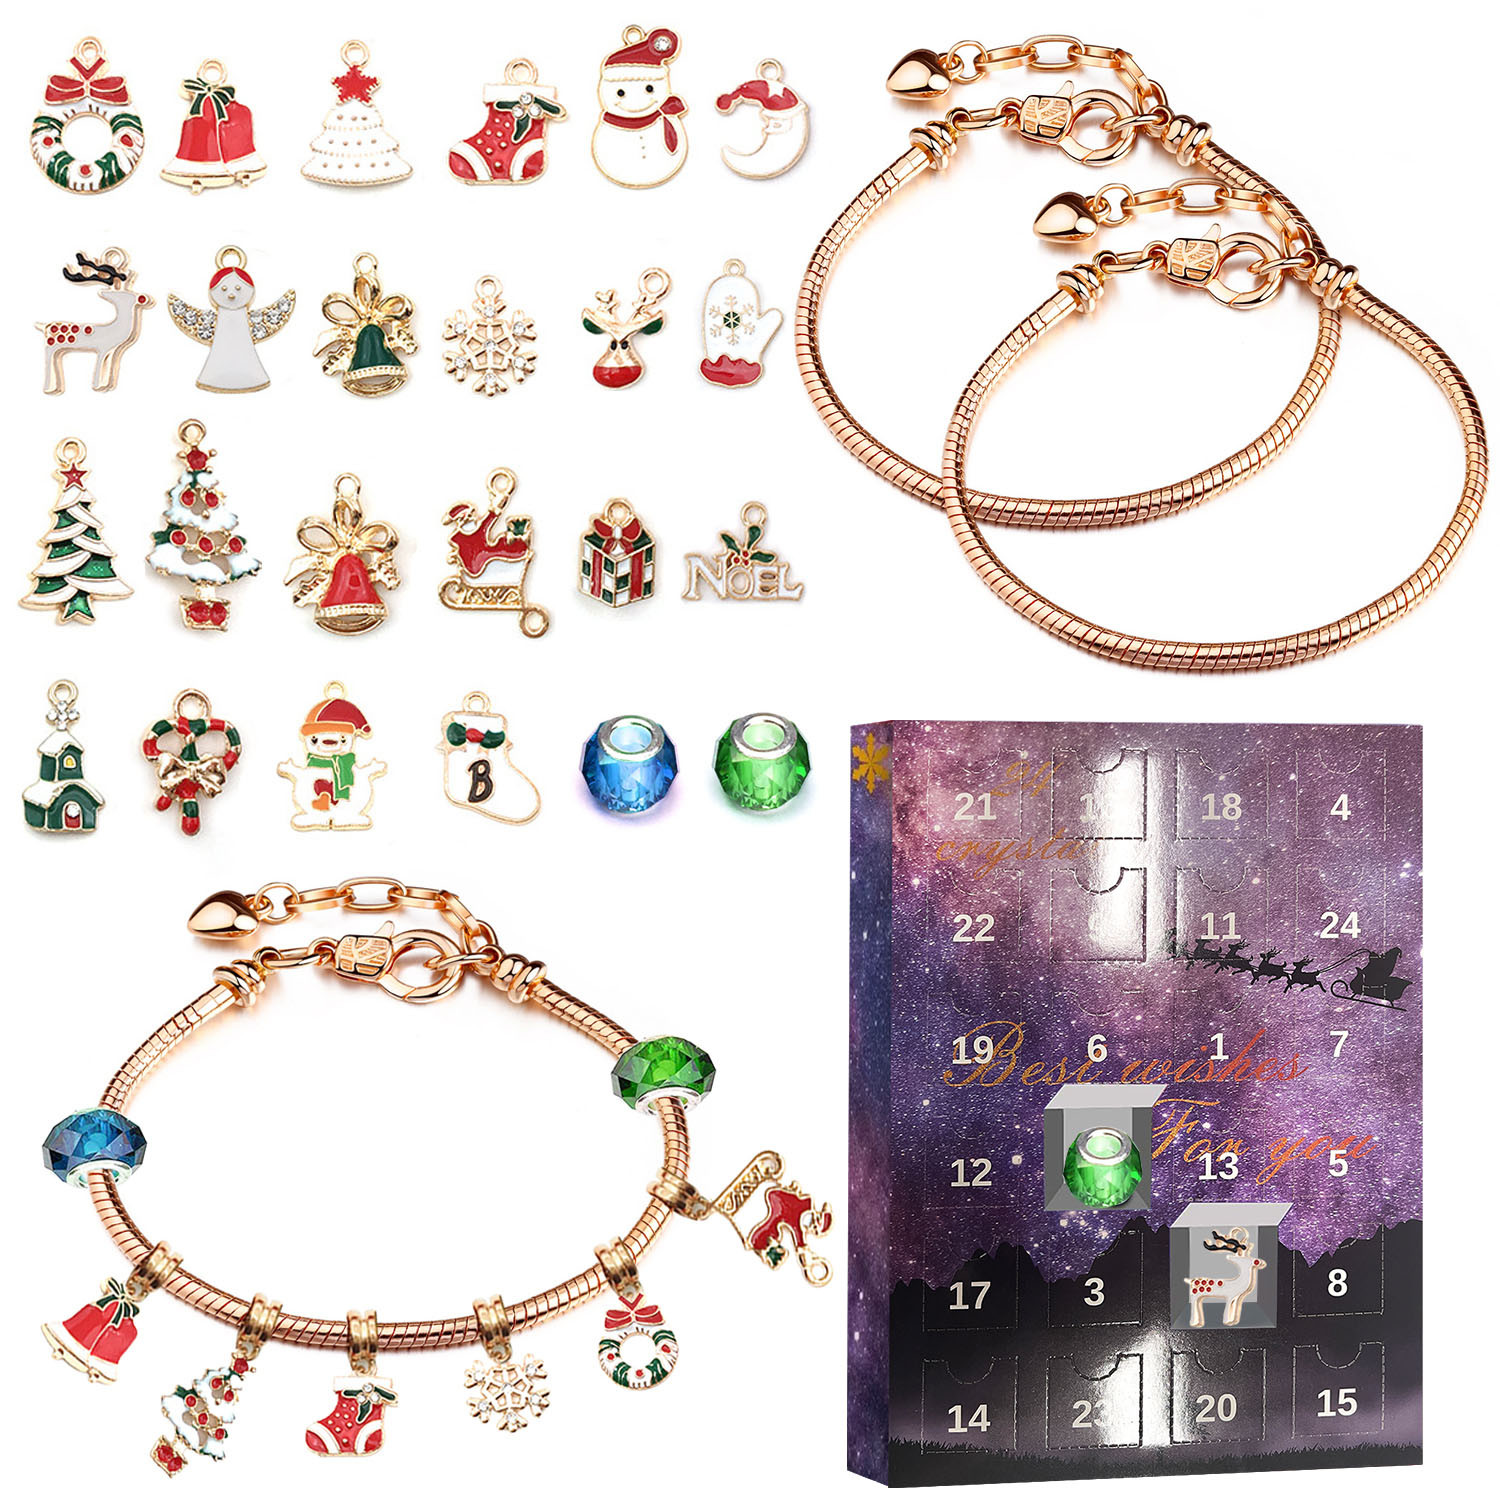 Teissuly Christmas Advent Calendar, Girls Unicorn Bracelet Making Kit, 24  Days Christmas Countdown Calendar with 2pcs DIY Charm Bracelets Kits,  Christmas Gifts for Girls Age 5-12 Year Old Teissuly WER202311211055 |  Bodega